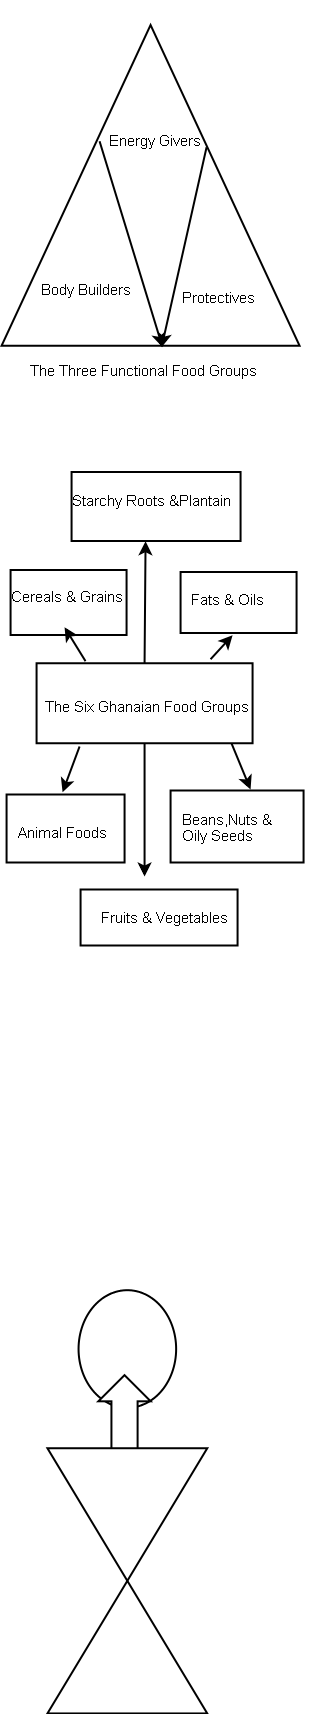 The Ghanaian Six Food Groups.png